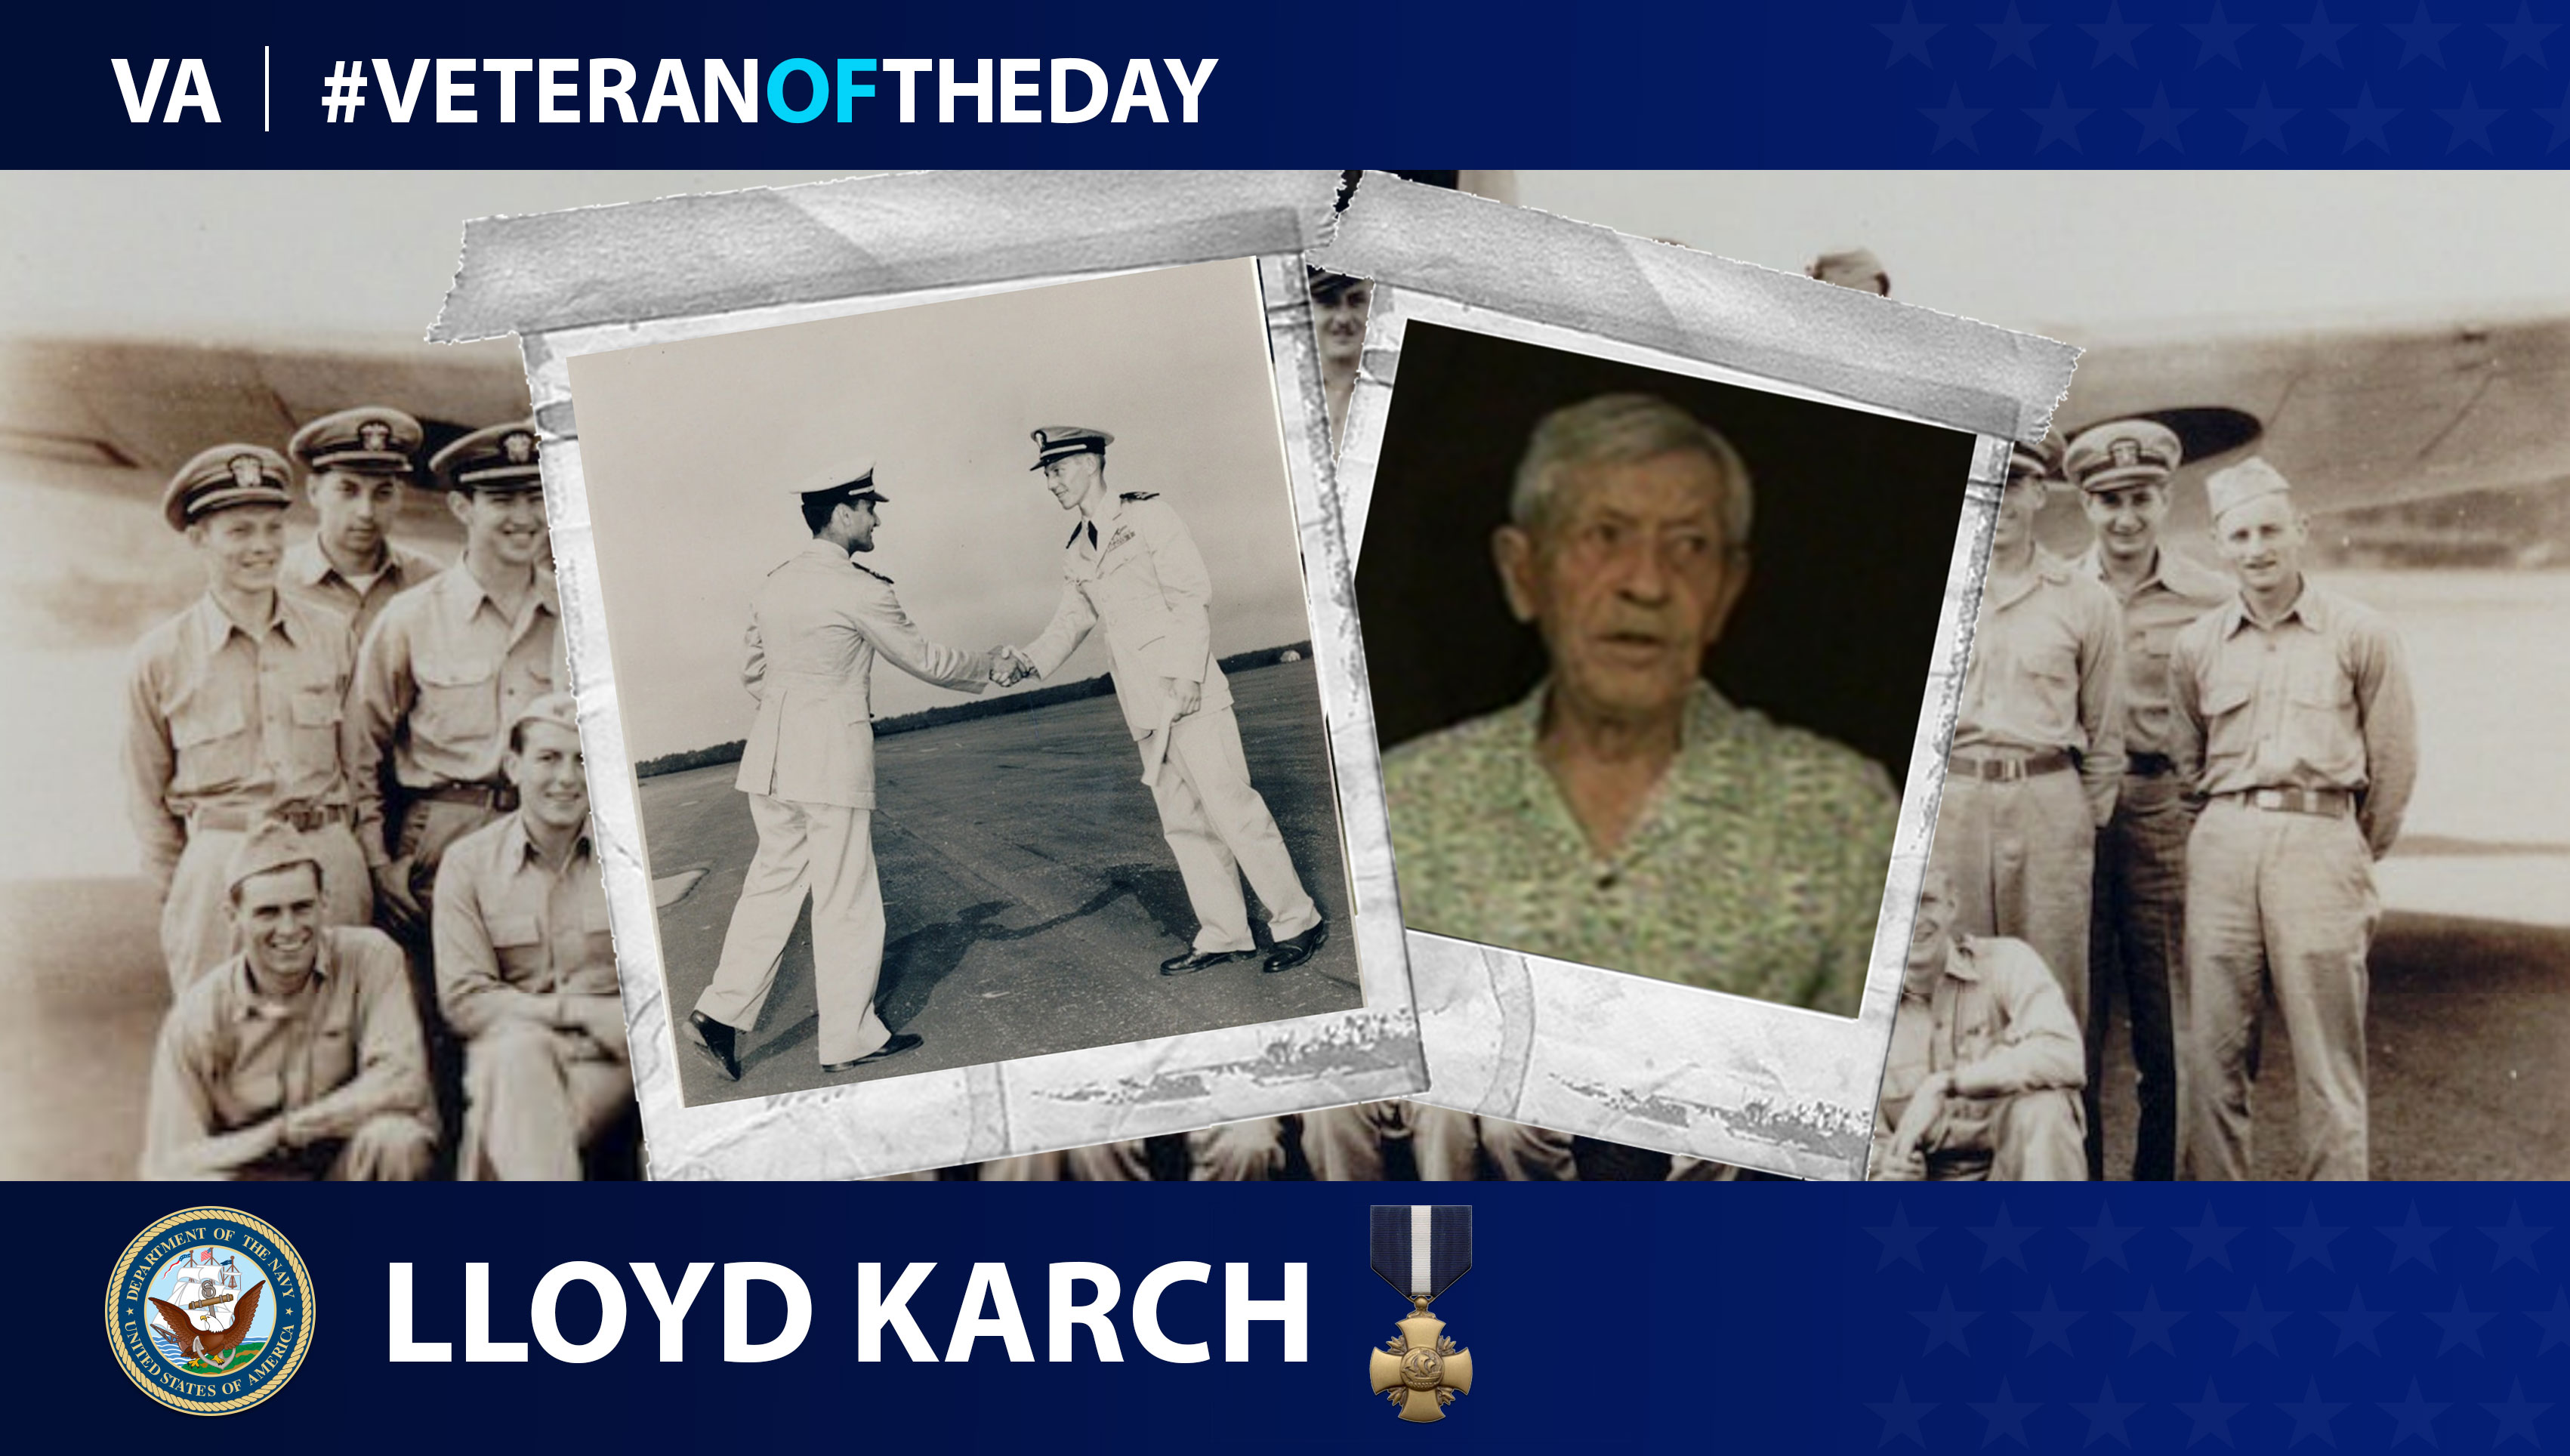 Navy Veteran Lloyd E. Karch is today's Veteran of the Day.